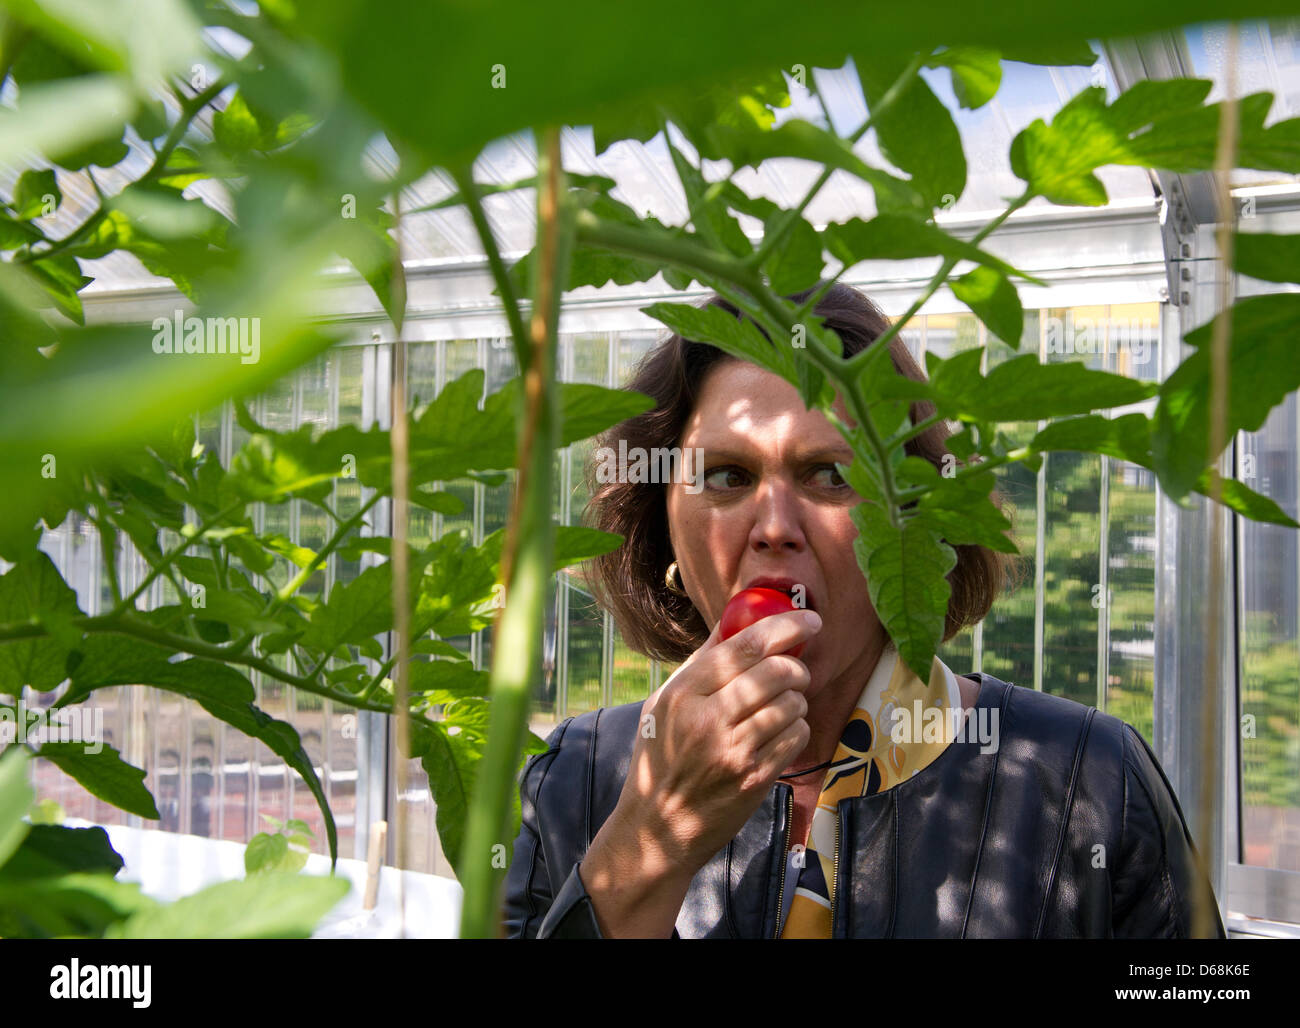 German Federal Agriculture Minister Ilse Aigner visits the company 'Efficient City Farming' and eats a tomato in Berlin, Germany, 17 July 2012. The project includes around 700 hobby gardeners. Her visit took place as part of the press tour on the topic of urban farming. Photo: SOEREN STACHE Stock Photo